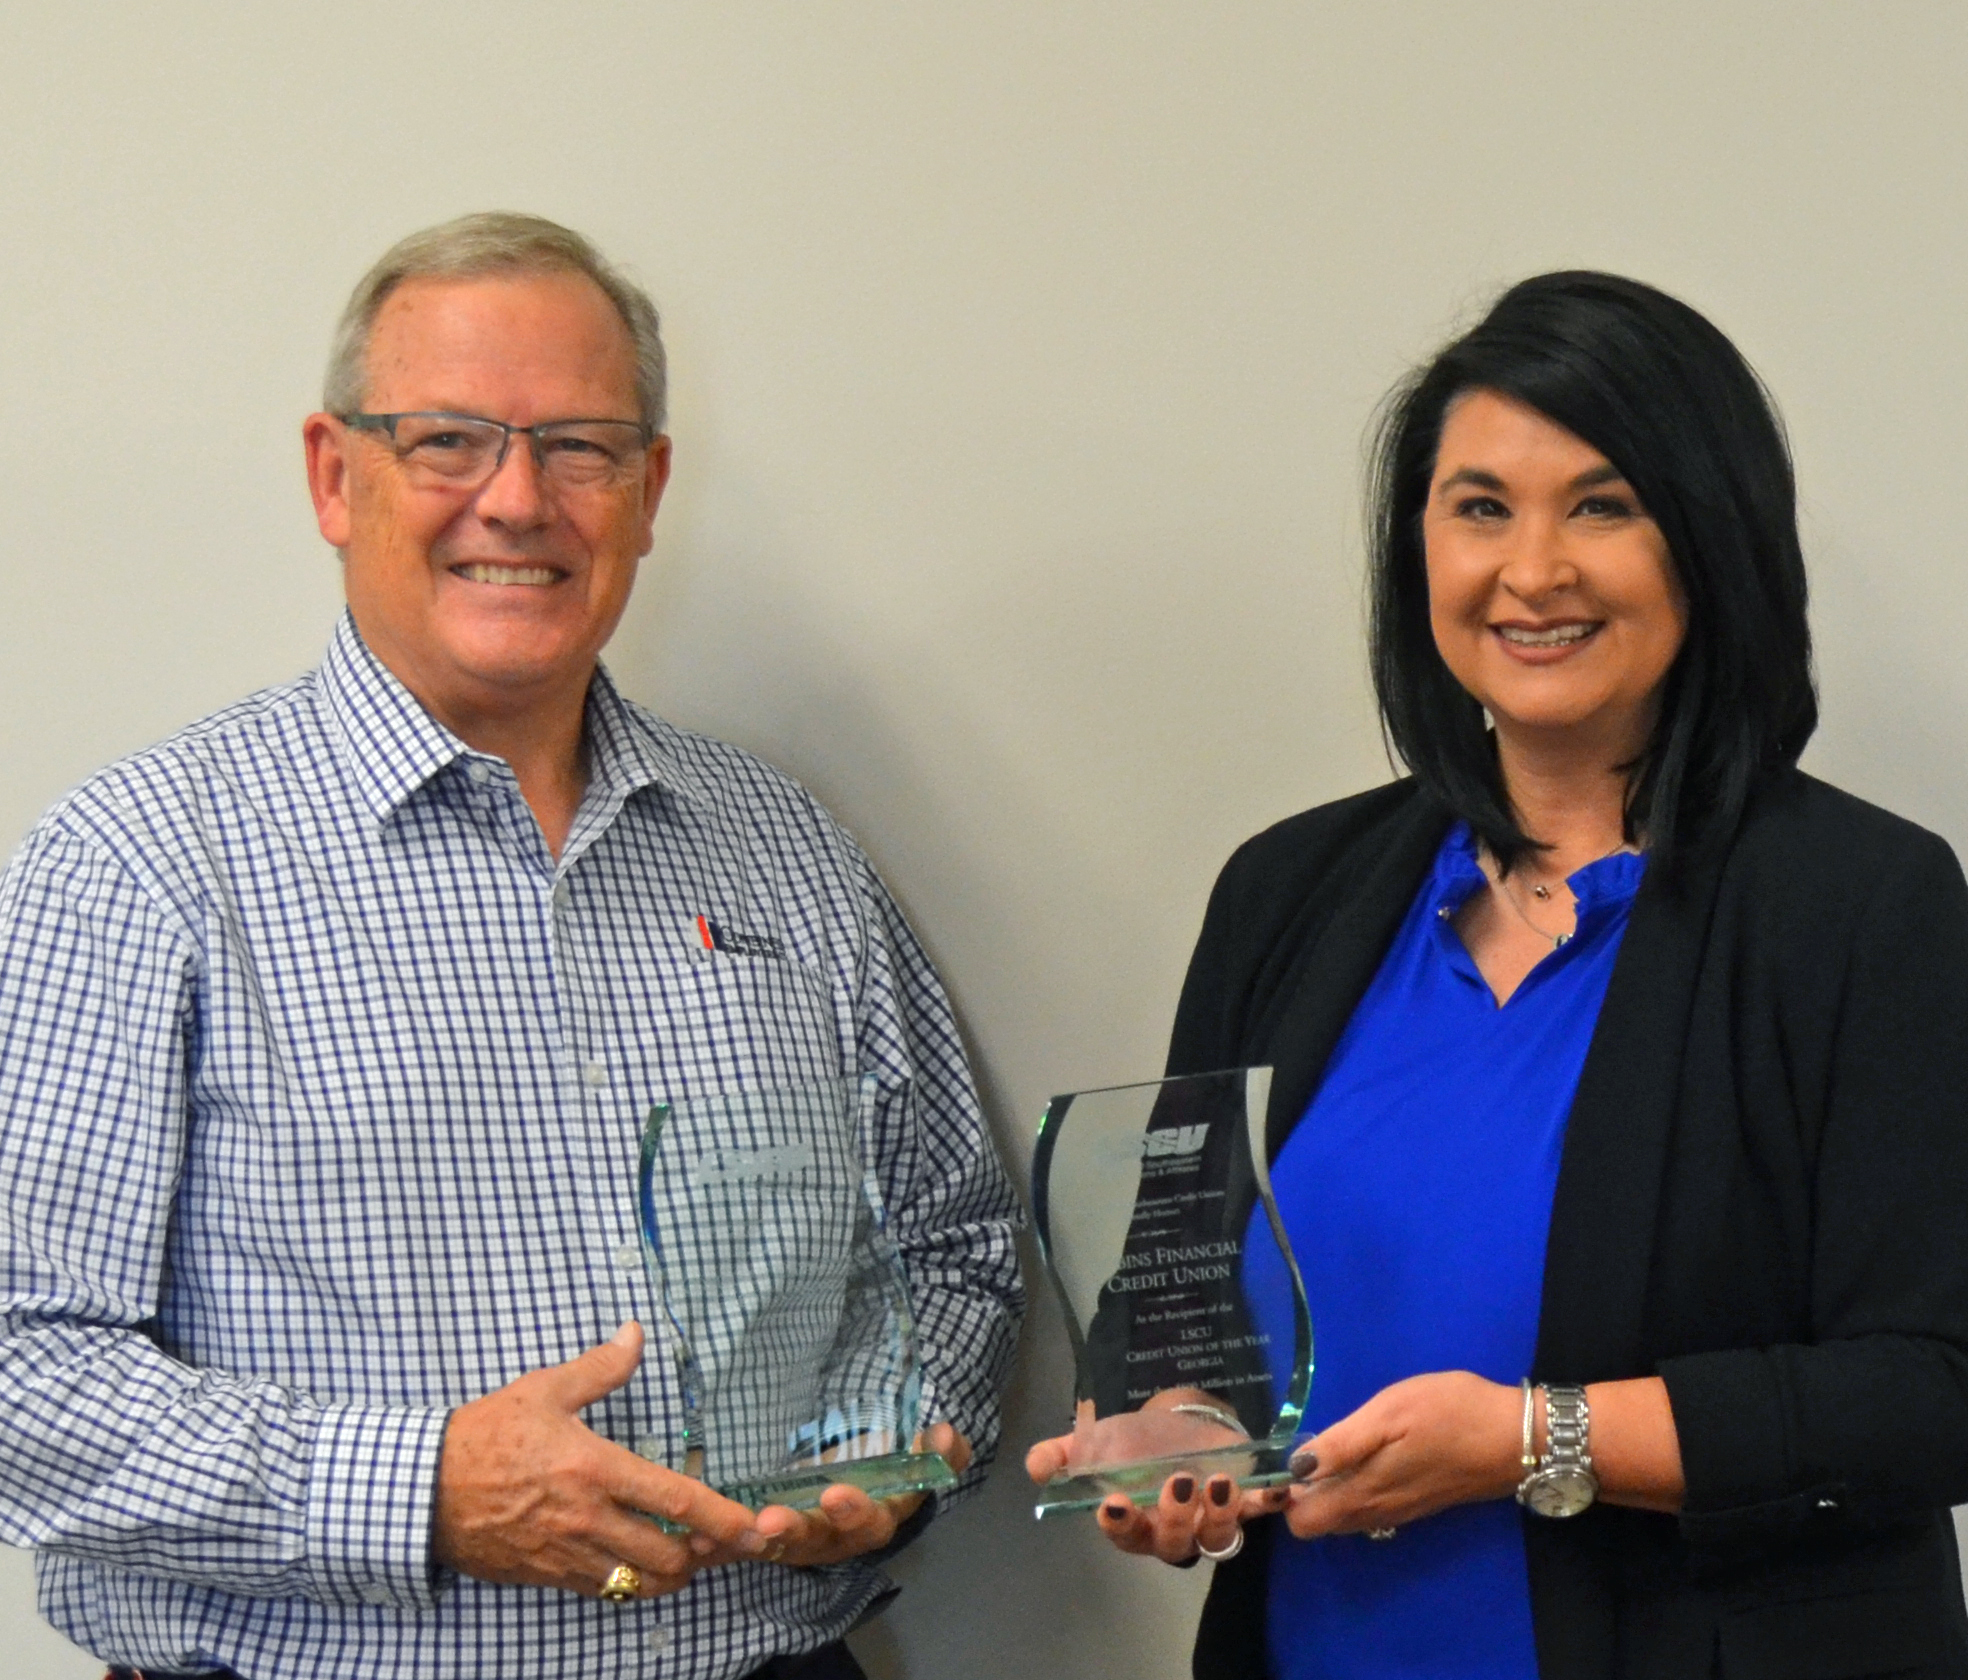 Two Local Credit Unions Receive Credit Union of the Year Awards